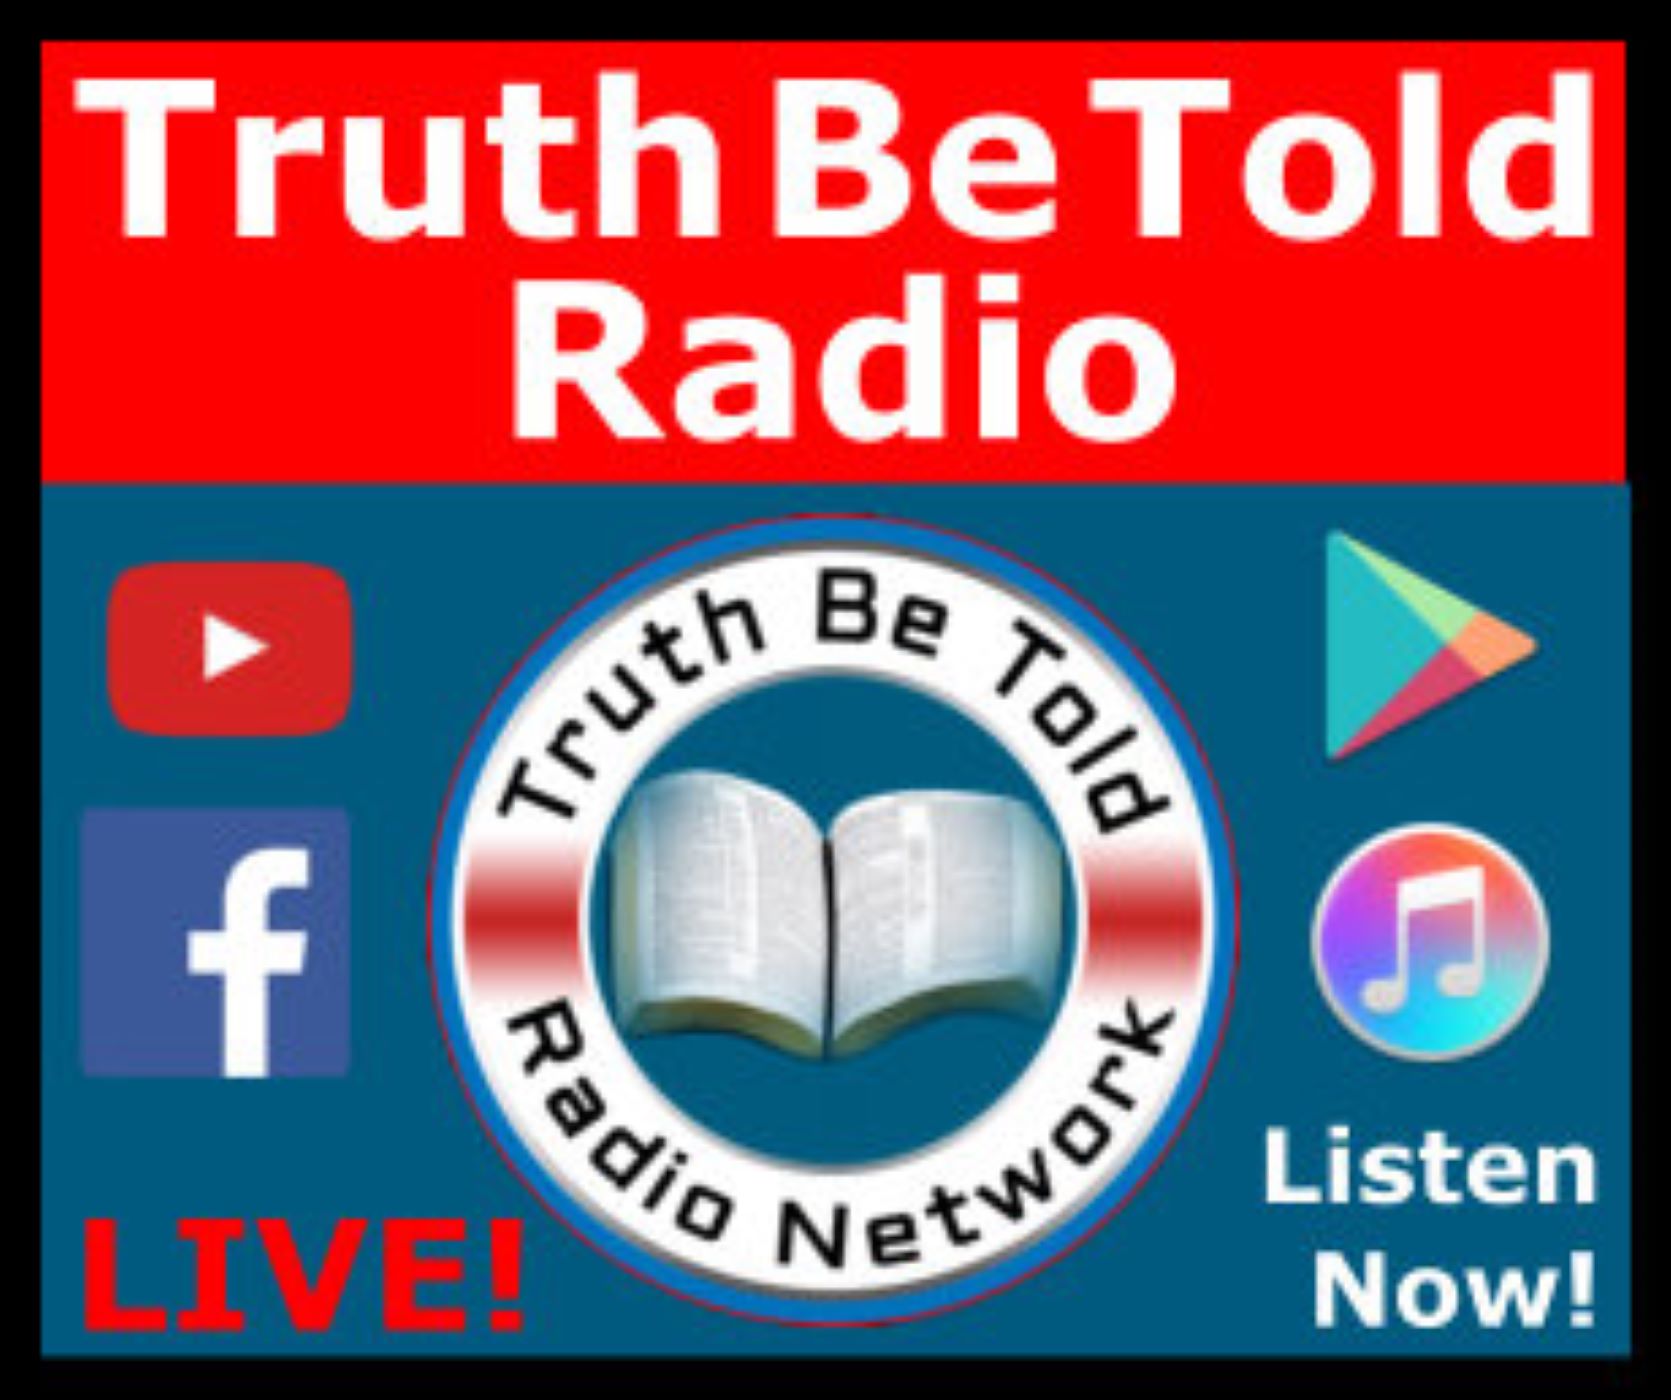 Permalink to:GSK on Truth Be Told Radio Network